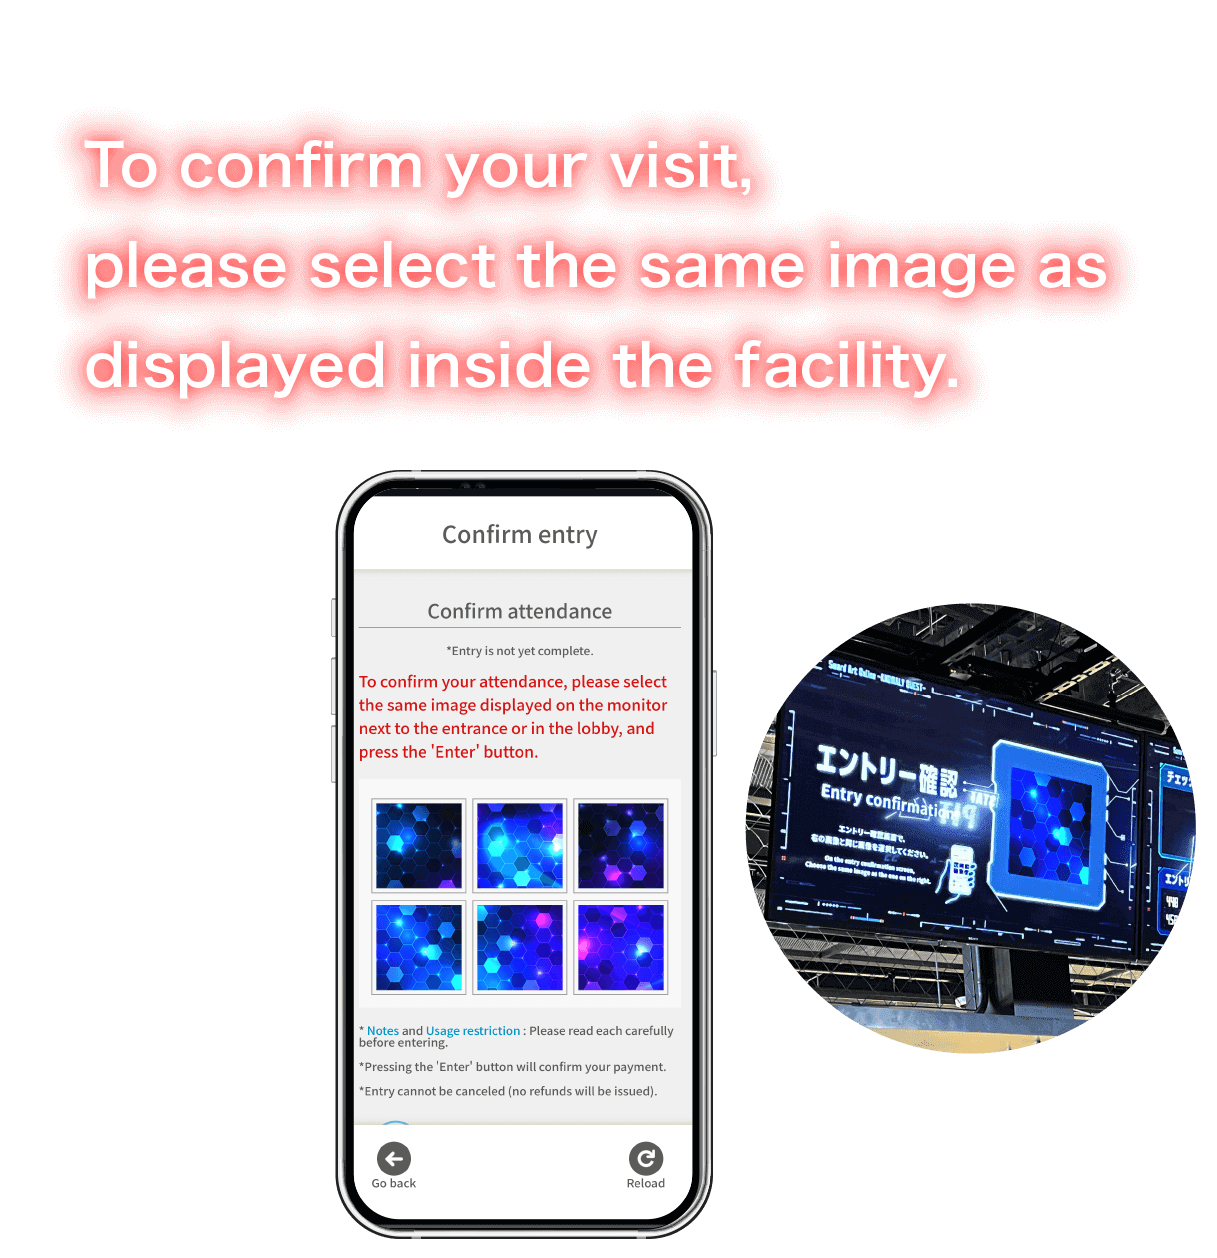 To confirm your visit, please select the same image as displayed inside the facility.